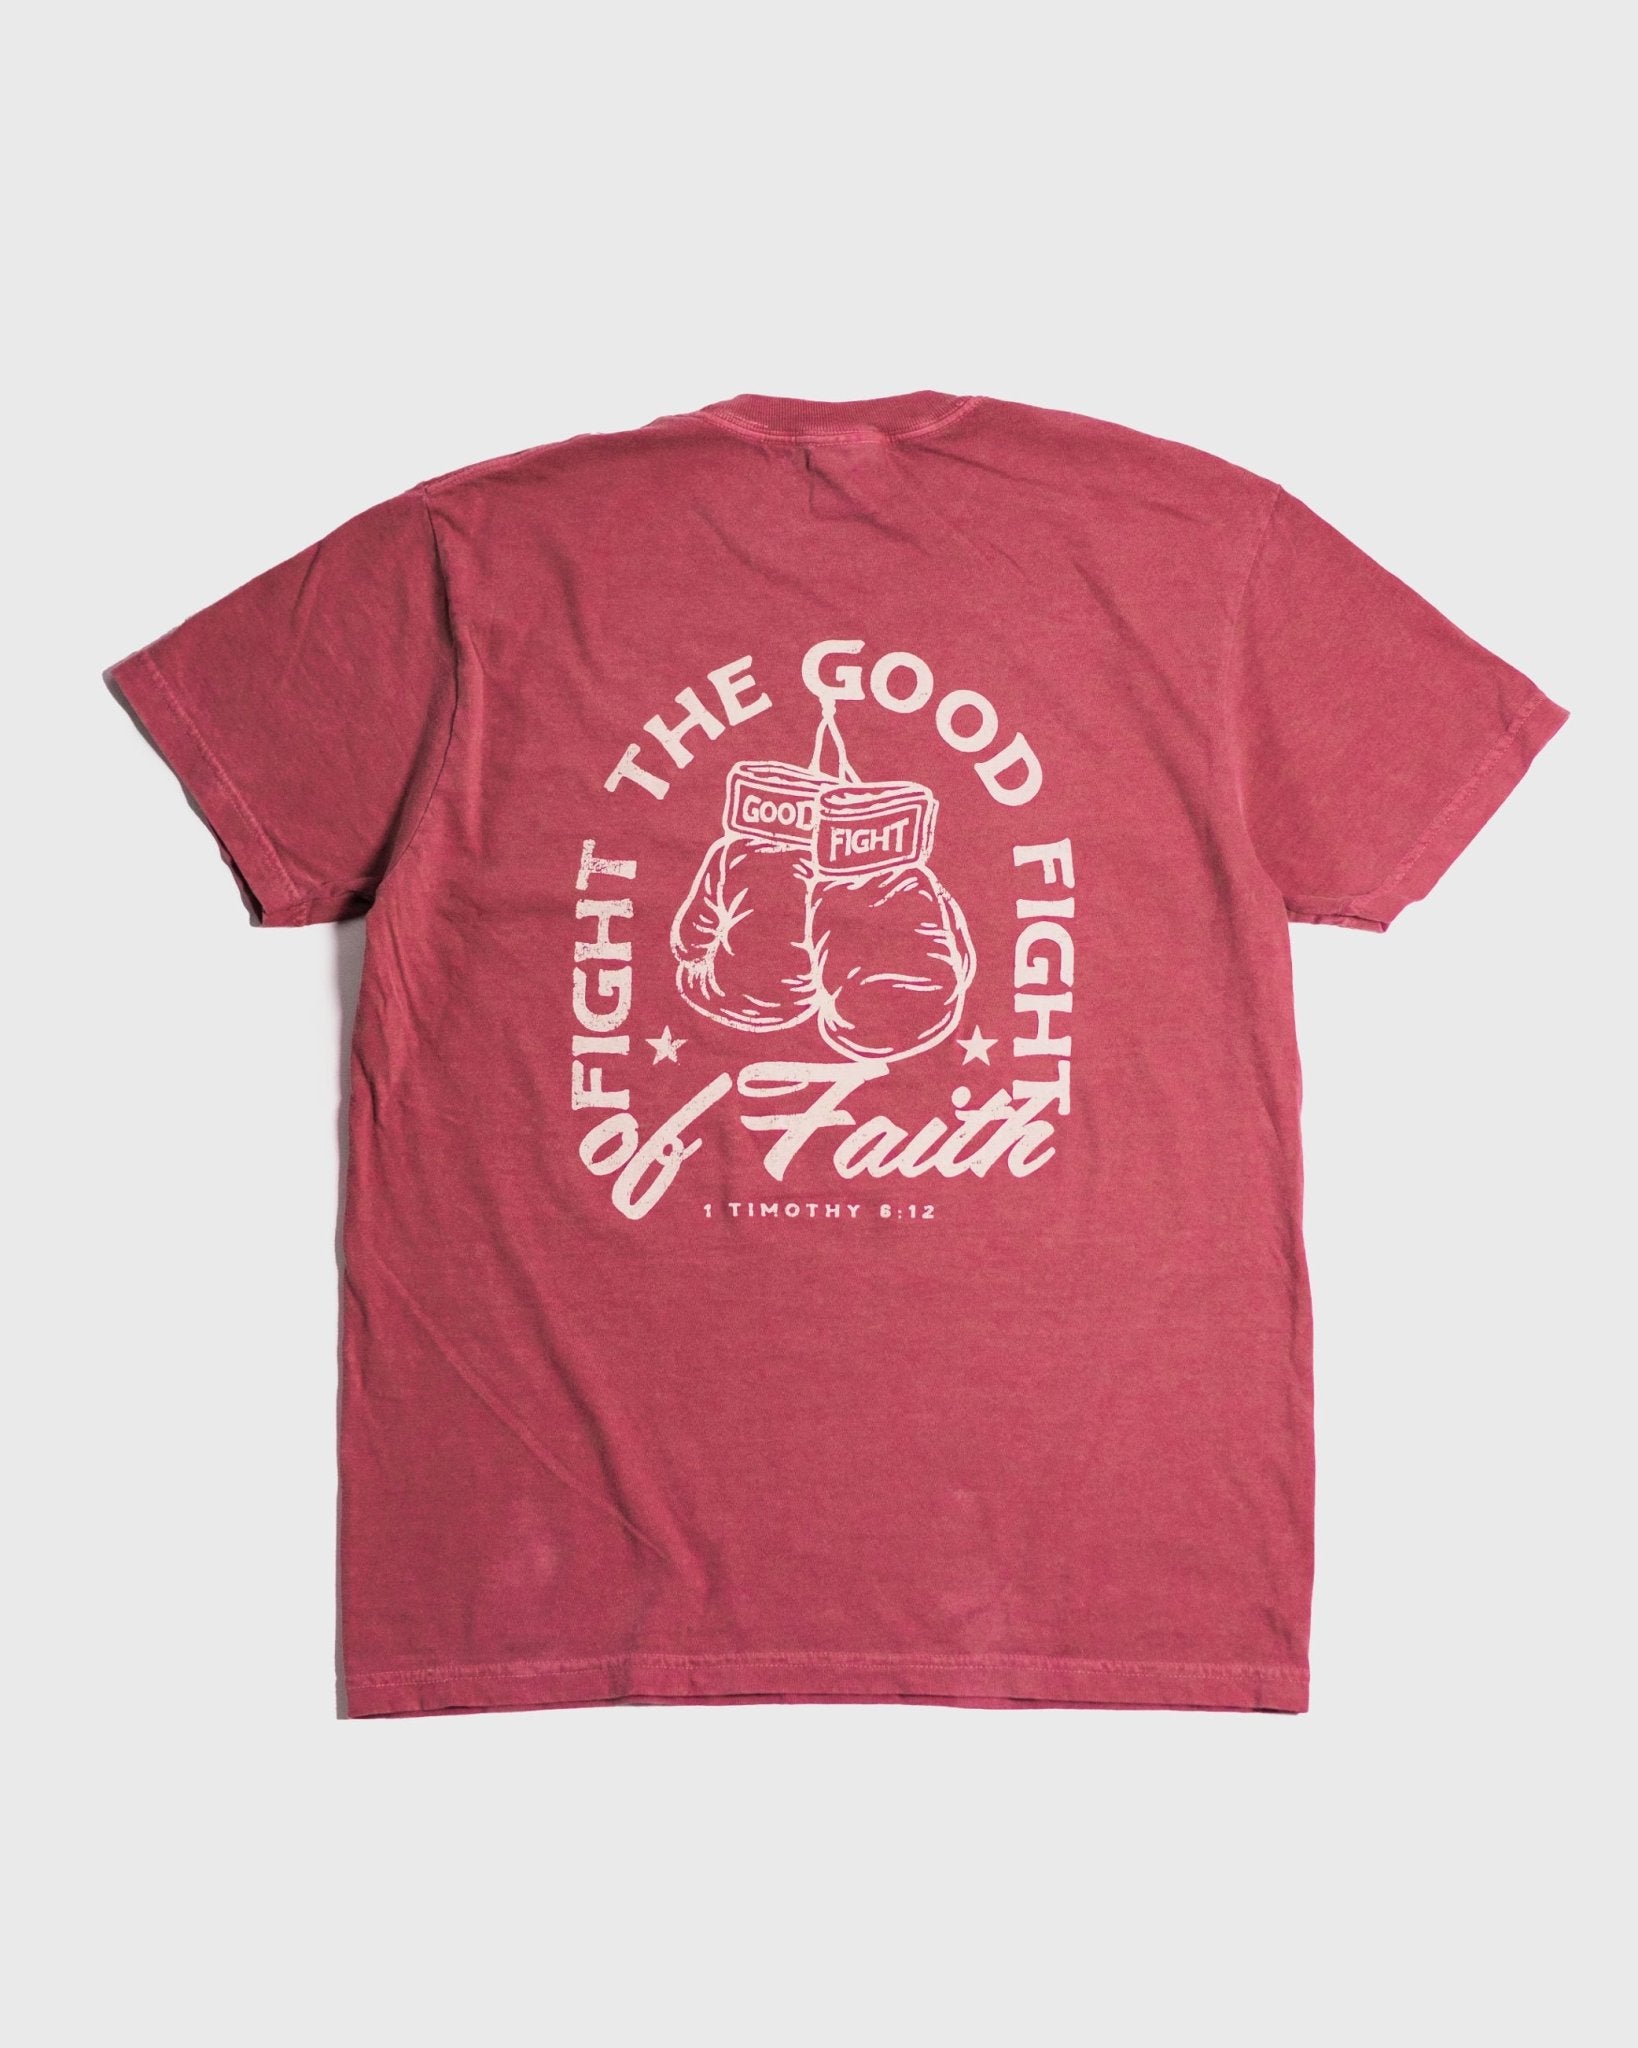 "Good Fight" Crimson Comfort Colors Tee (Limited Edition) - Proclamation Coalition